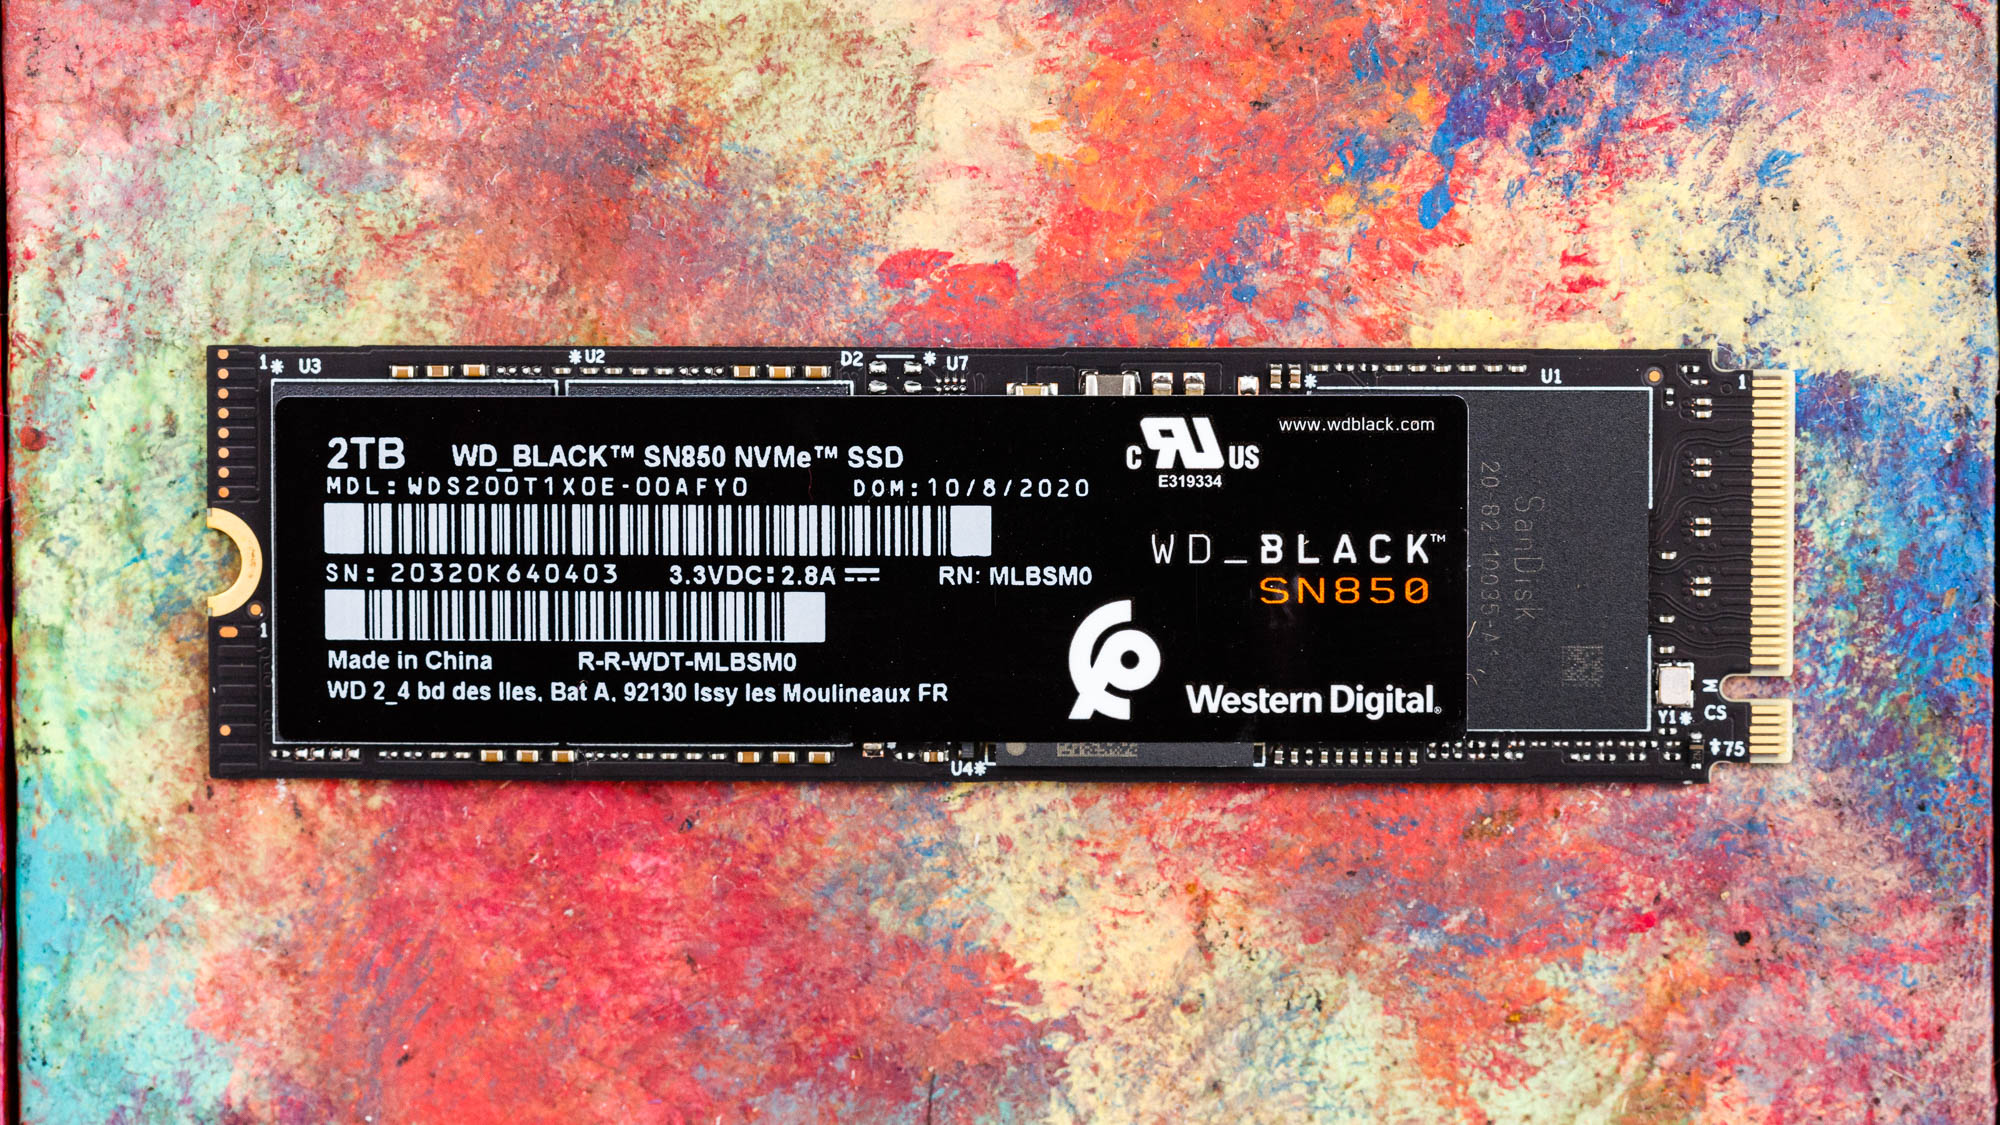 wd-black-sn850-m.2-nvme-ssd-review:-top-tier-storage-for-gamers-and-pros-(updated)